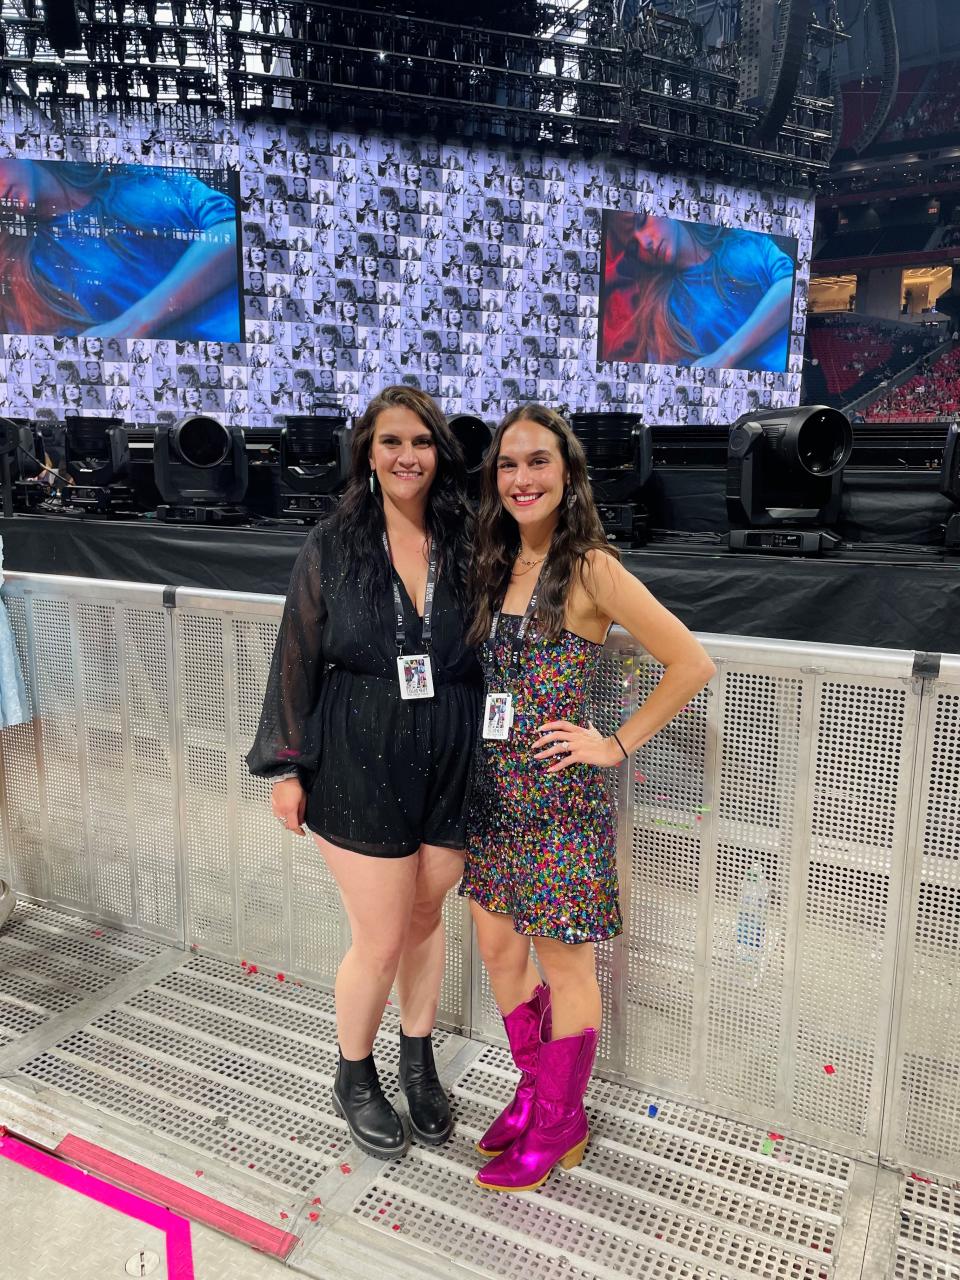 Natalie Micciulli, co-owner of Bonita Springs' Ceremony Brewing, saw Taylor Swift's Eras Tour in Atlanta with her sister Marissa Vercrouse in April 2023.